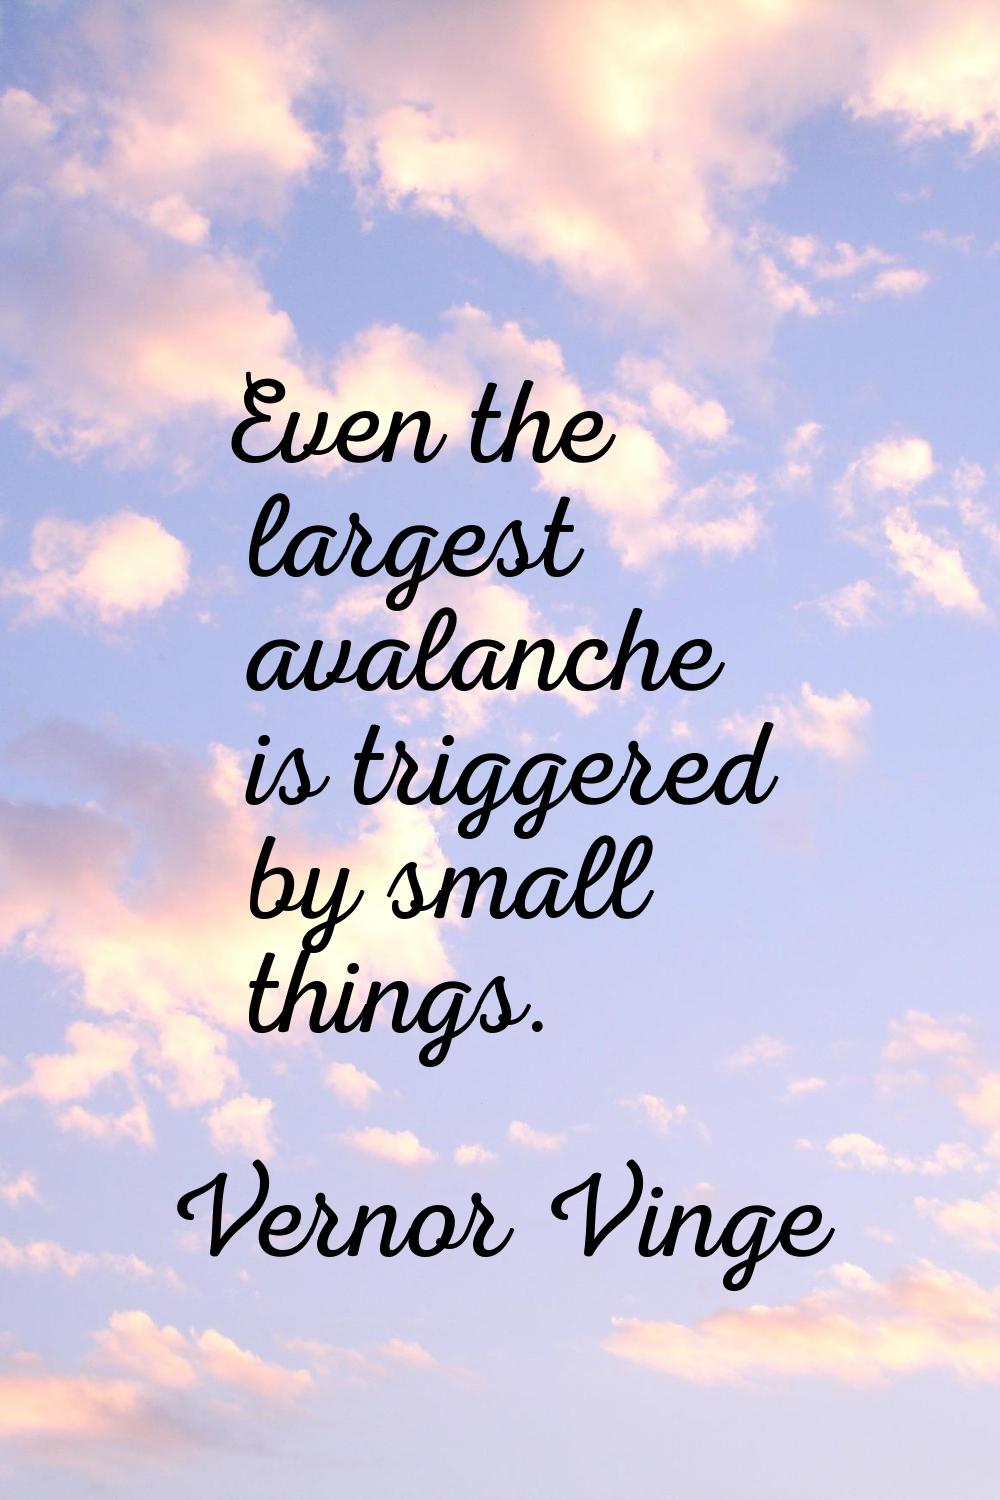 Even the largest avalanche is triggered by small things.